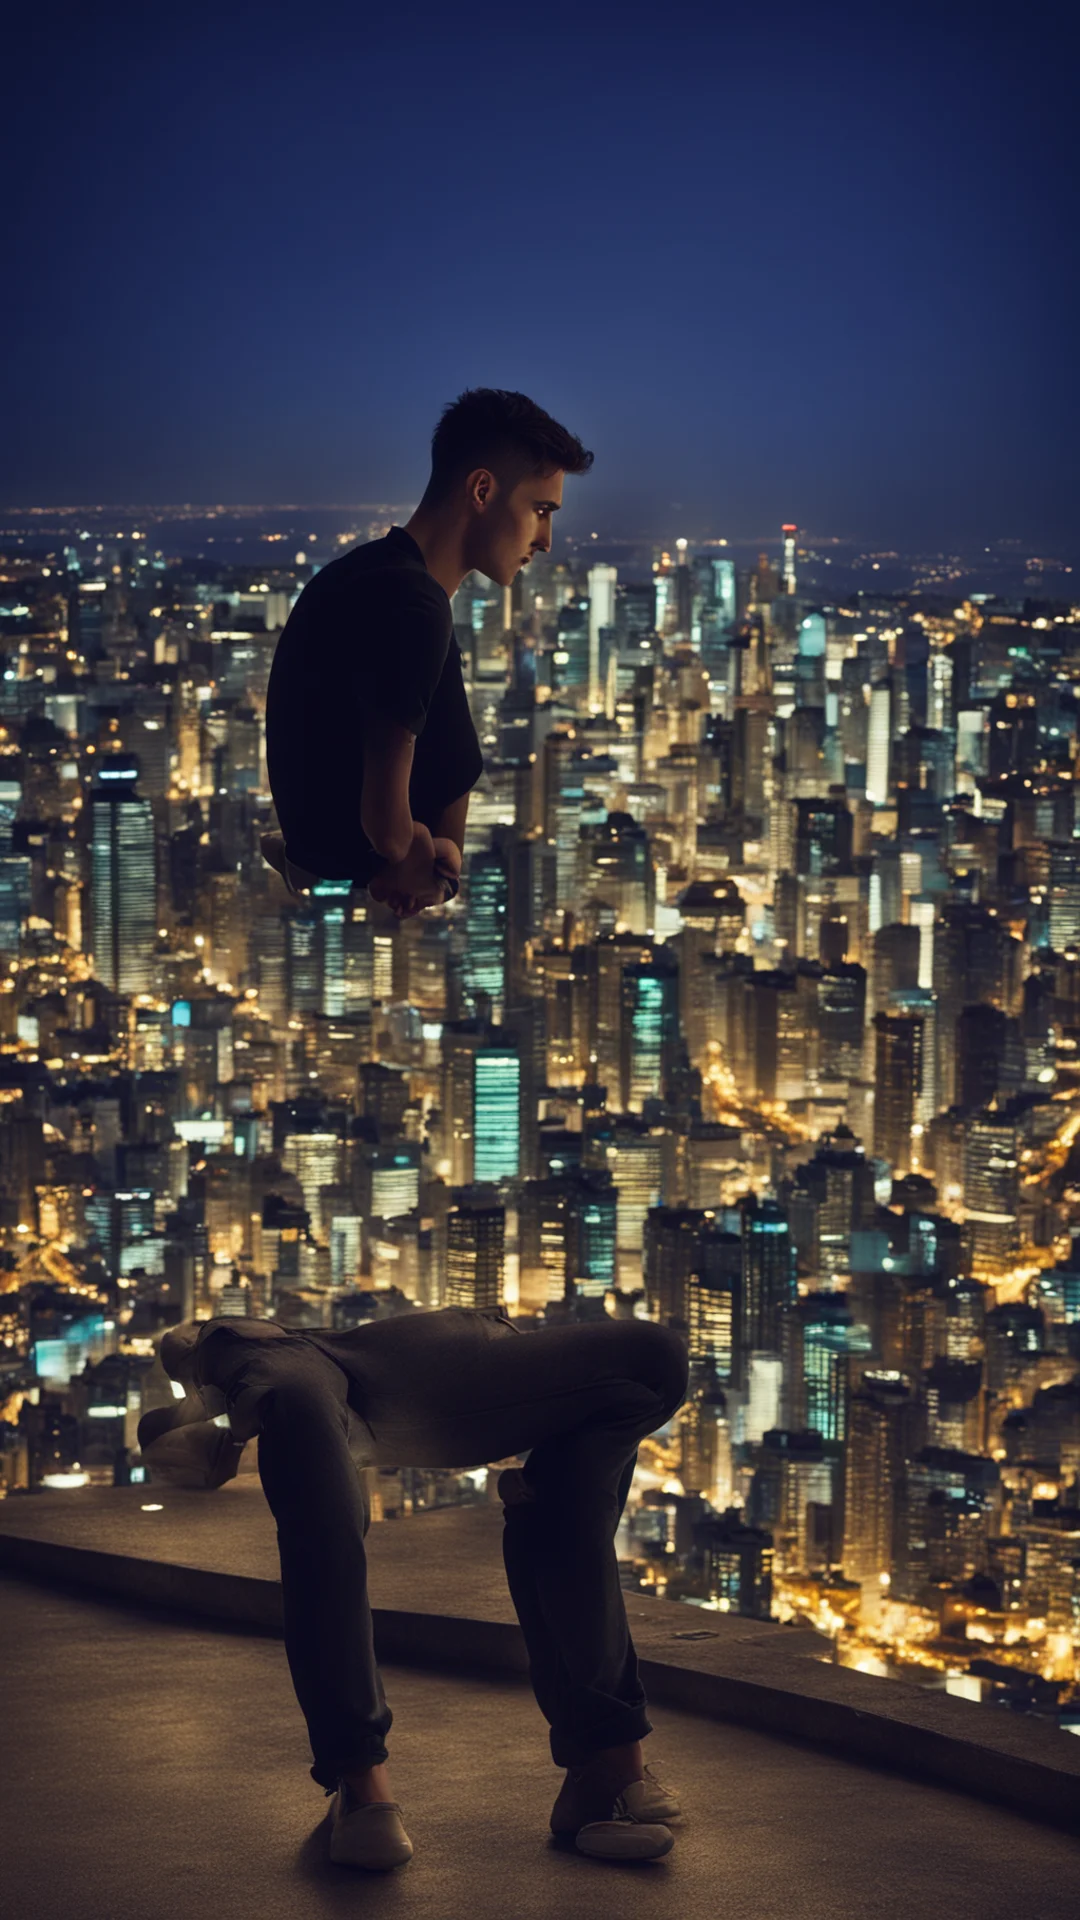 young man sitting on terace and looking on city at night amazing awesome portrait 2 tall